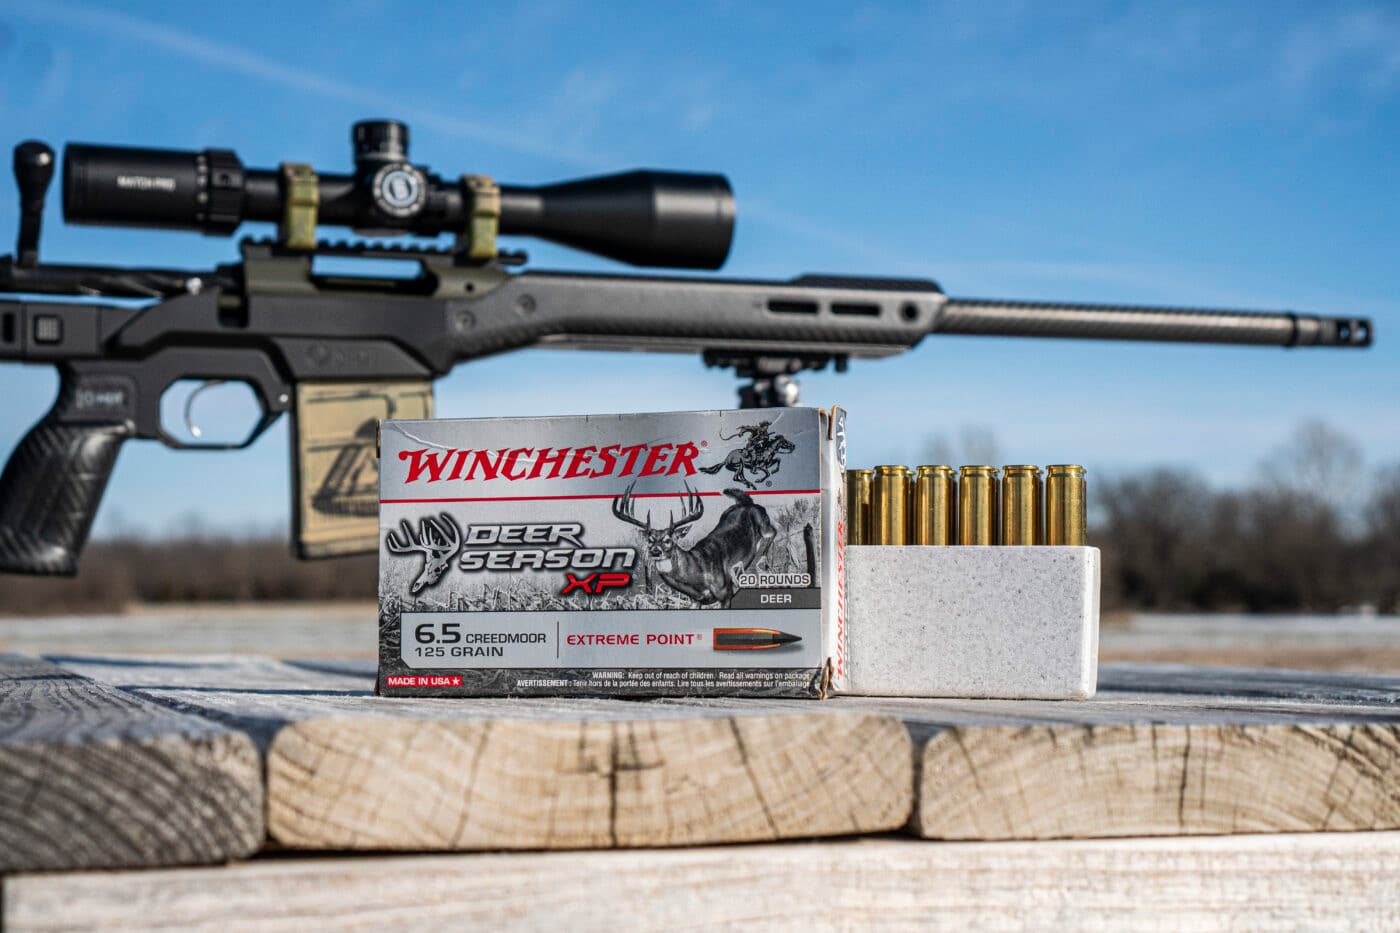 Testing at the range with the Springfield Waypoint rifle, MDT HNT26 chassis, and Winchester Deer Season ammo stock